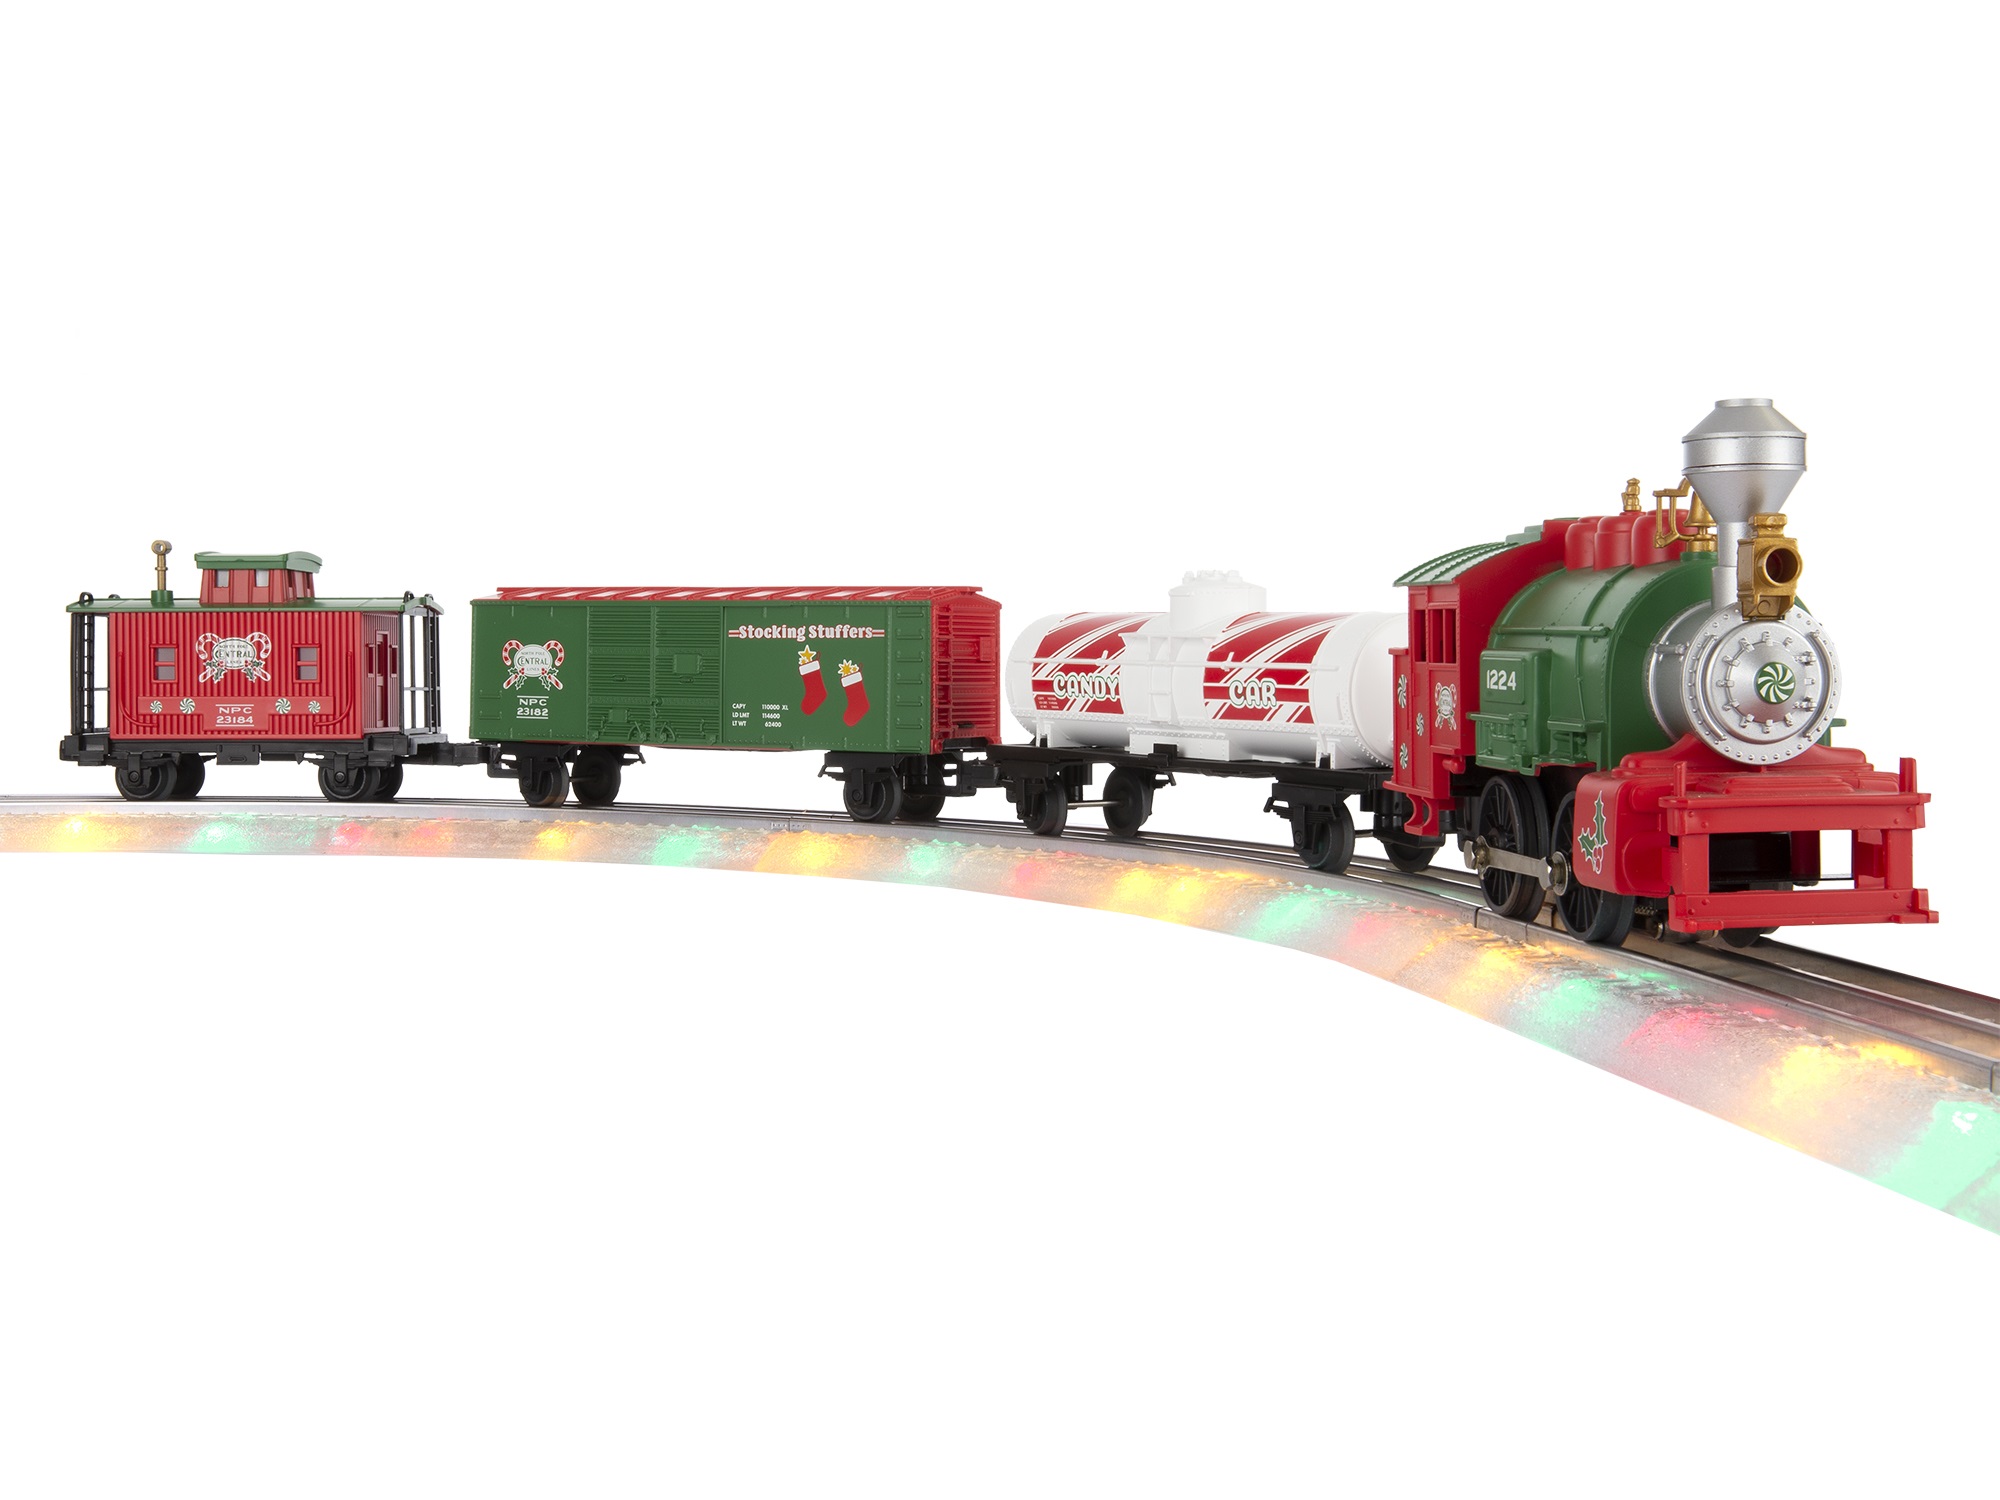 North Pole Central Junction Christmas Set with Illuminated Tracks